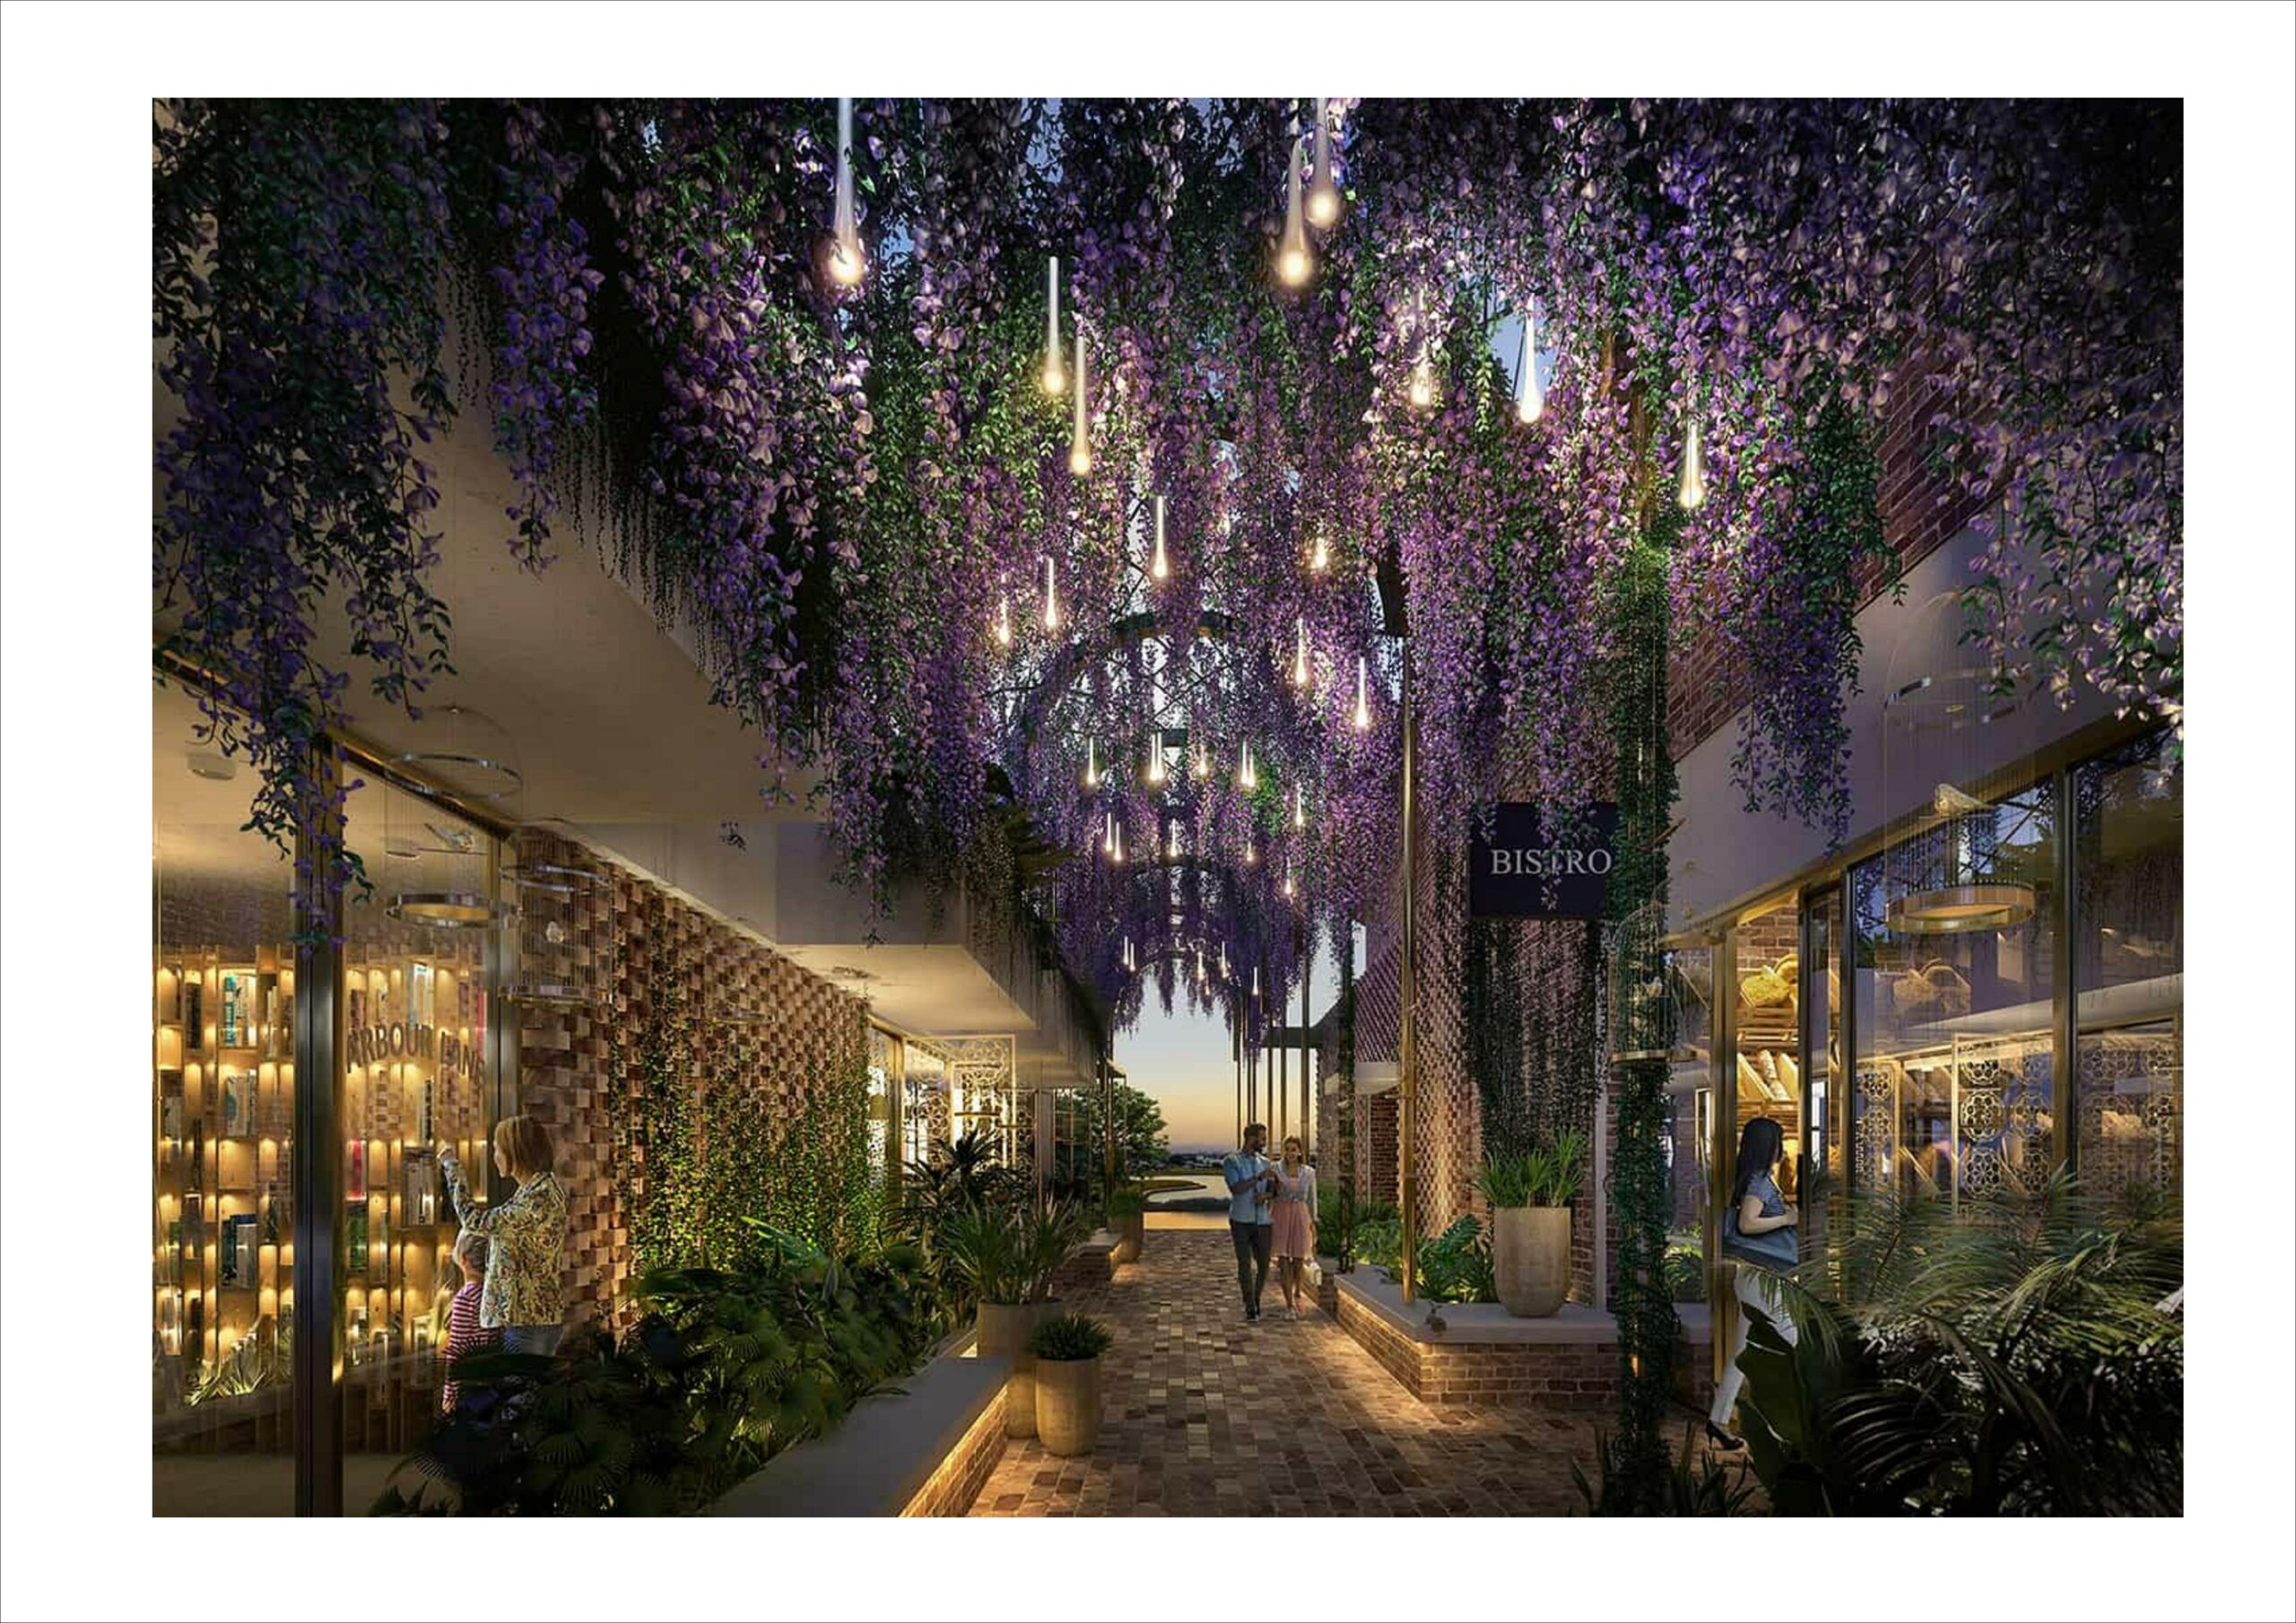 A walkway between two modern brick commercial tenancies with a beautiful arbor overhead adorned with purple flowers and hanging lights at sunset